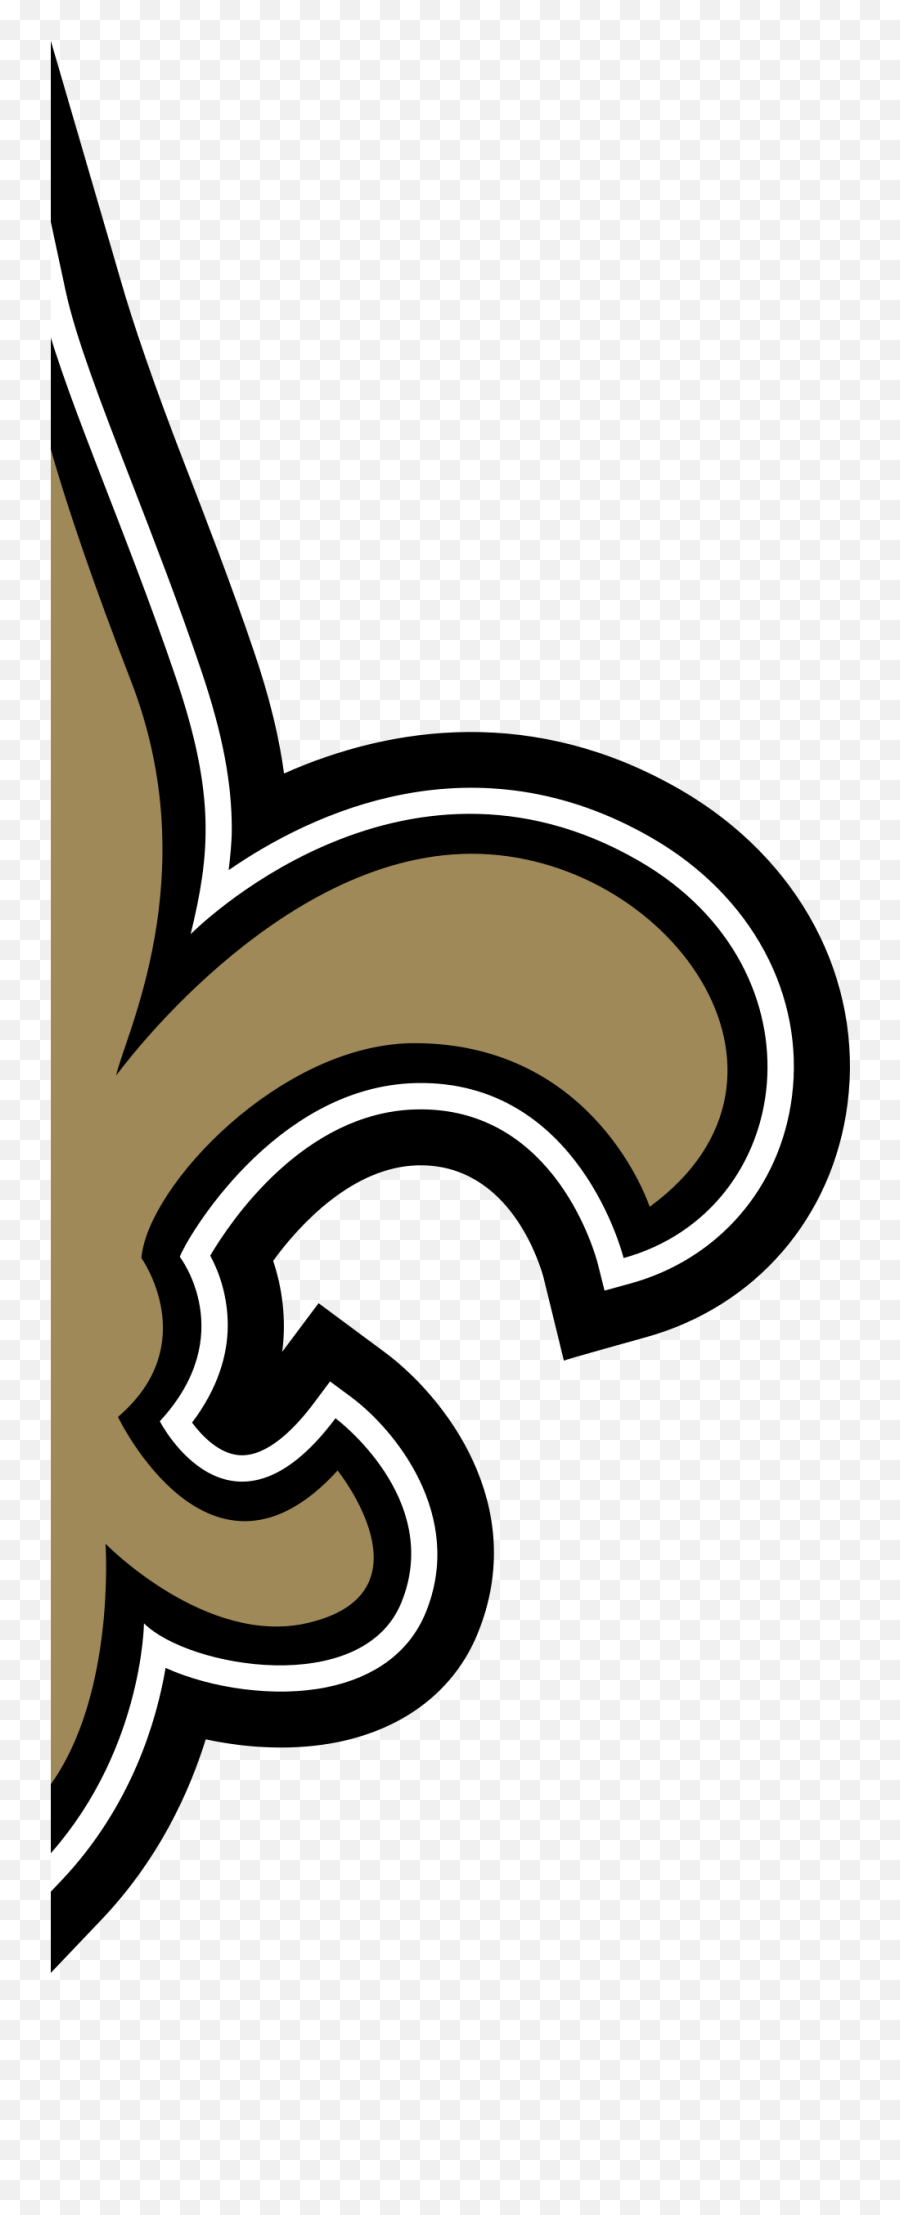 98 Of People Canu0027t Name These Nfl Team Logos From Just A - New Orleans Saints Fleur De Lis Png,Nfl Logos 2017